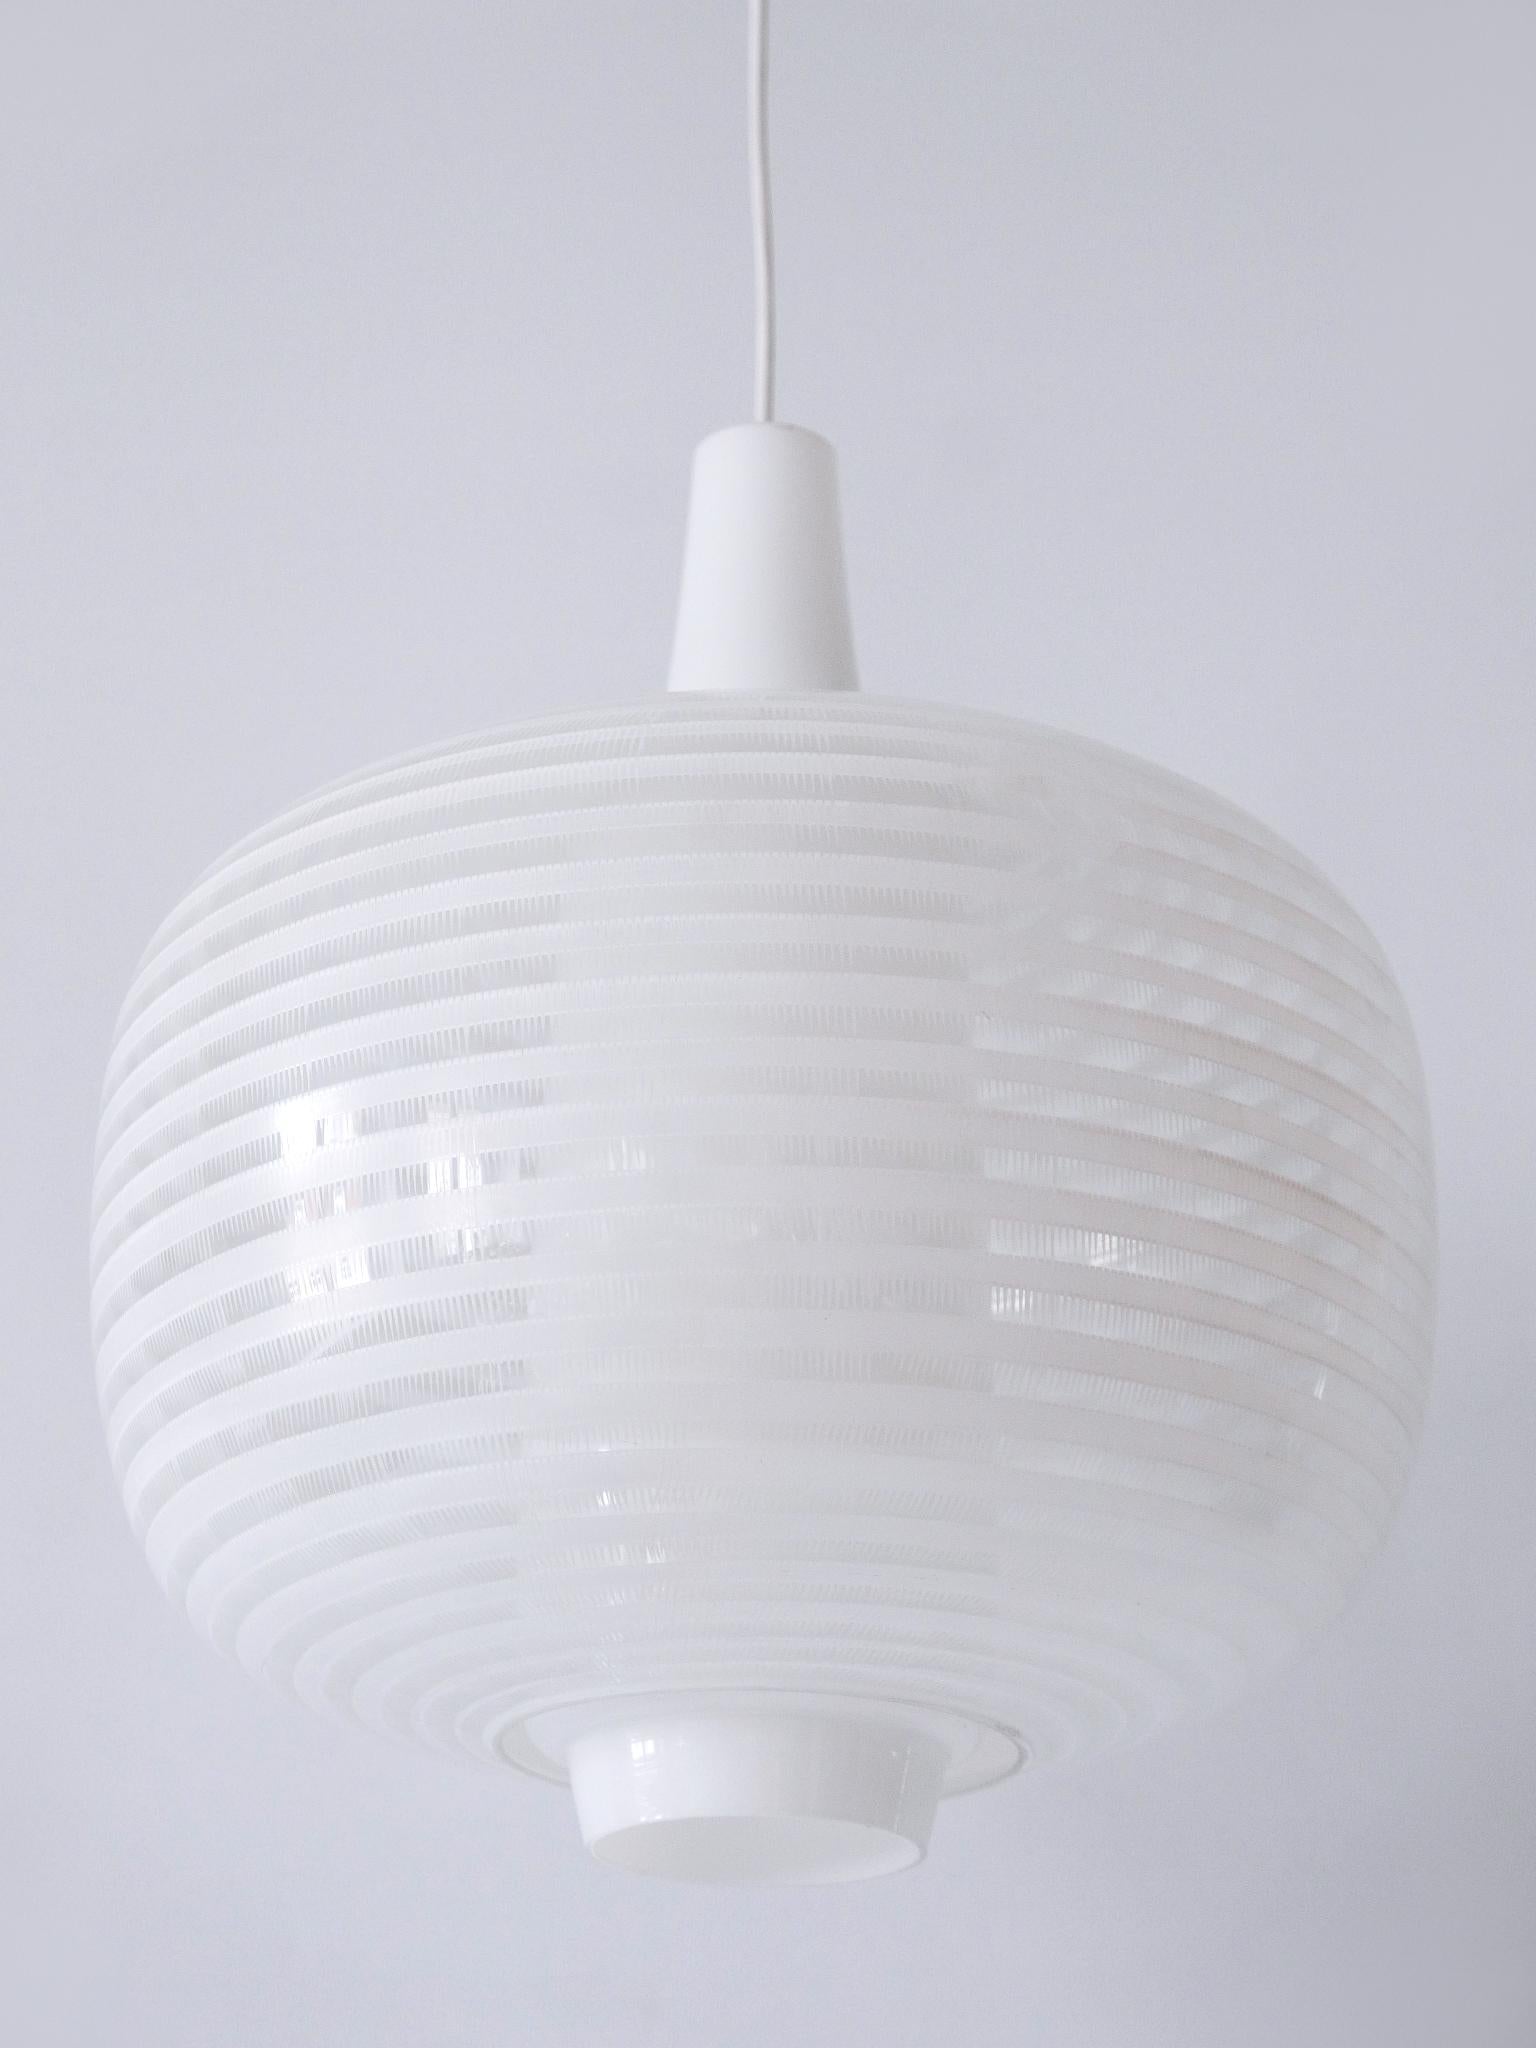 Extremely rare and highly decorative Mid-Century Modern pendant lamp or hanging light. Model 